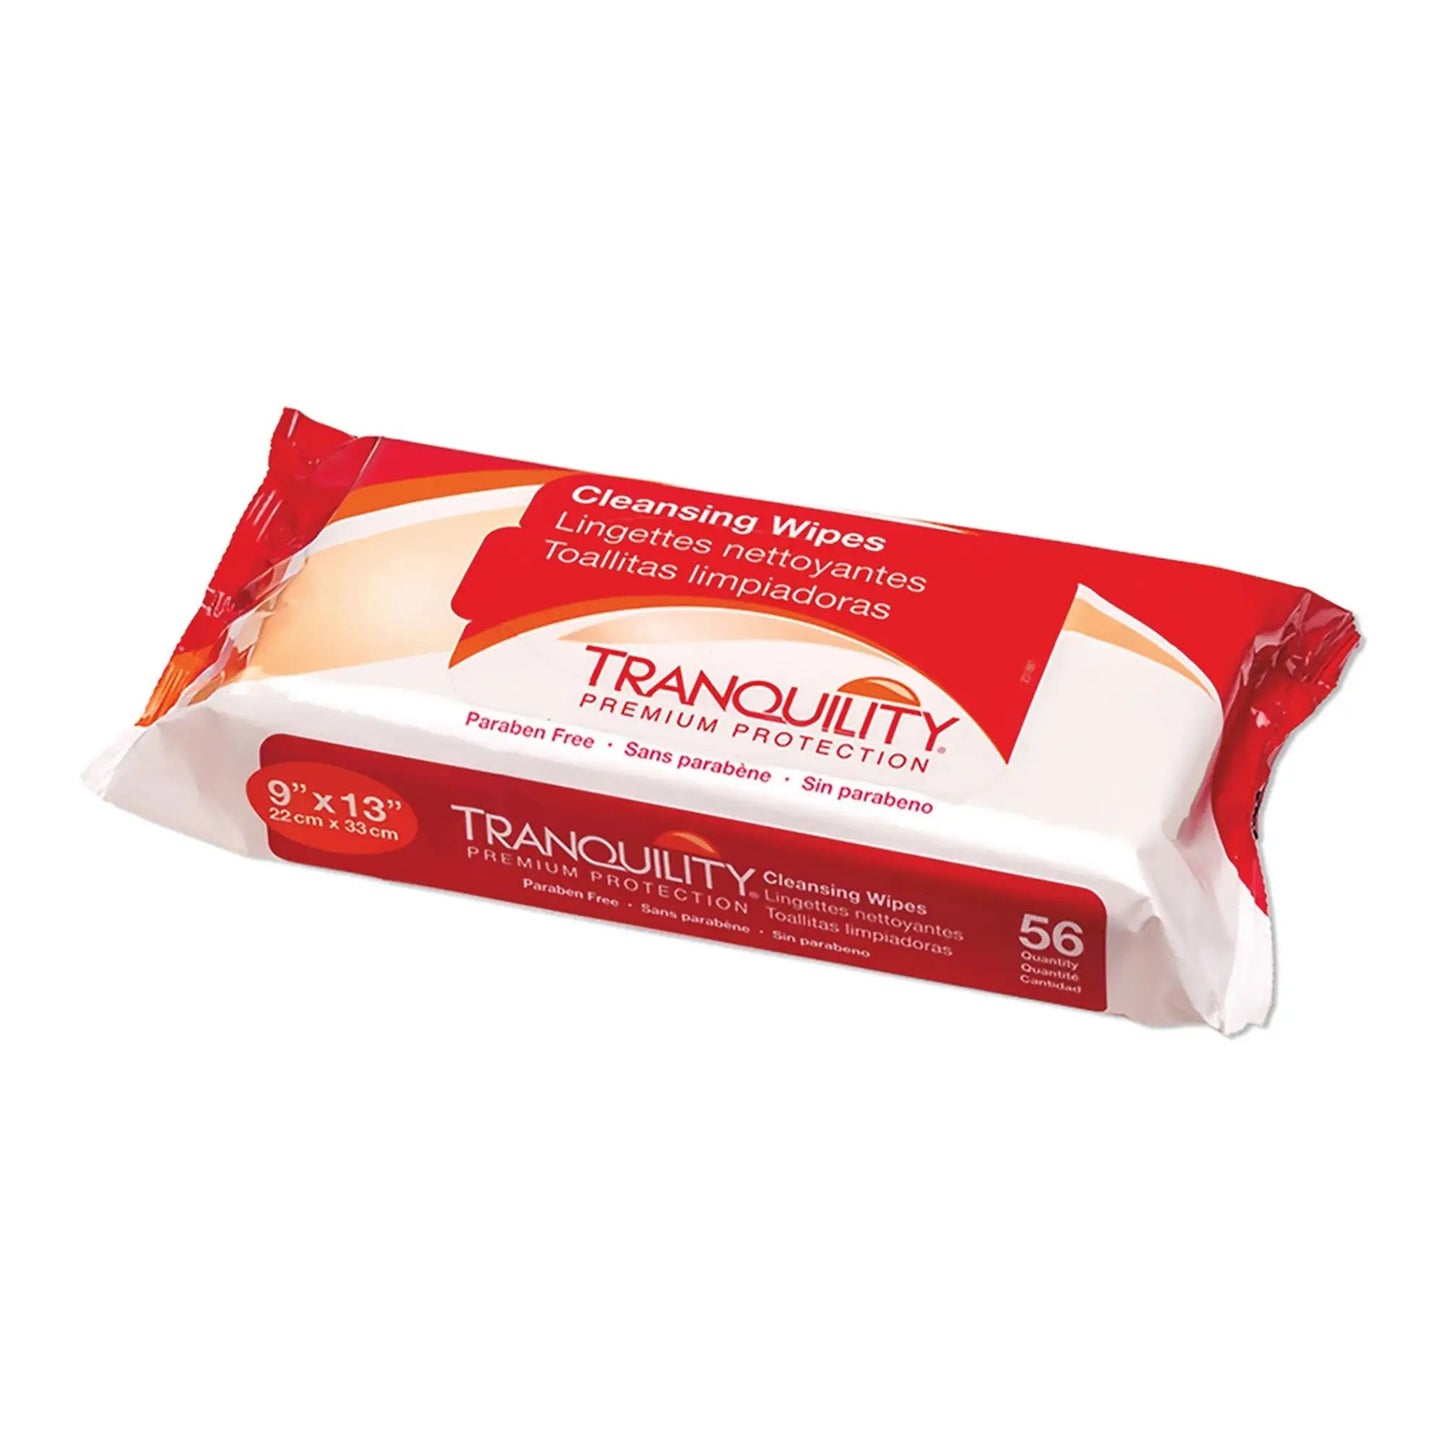 Tranquility Scented Cleansing Wipes, Soft Pack